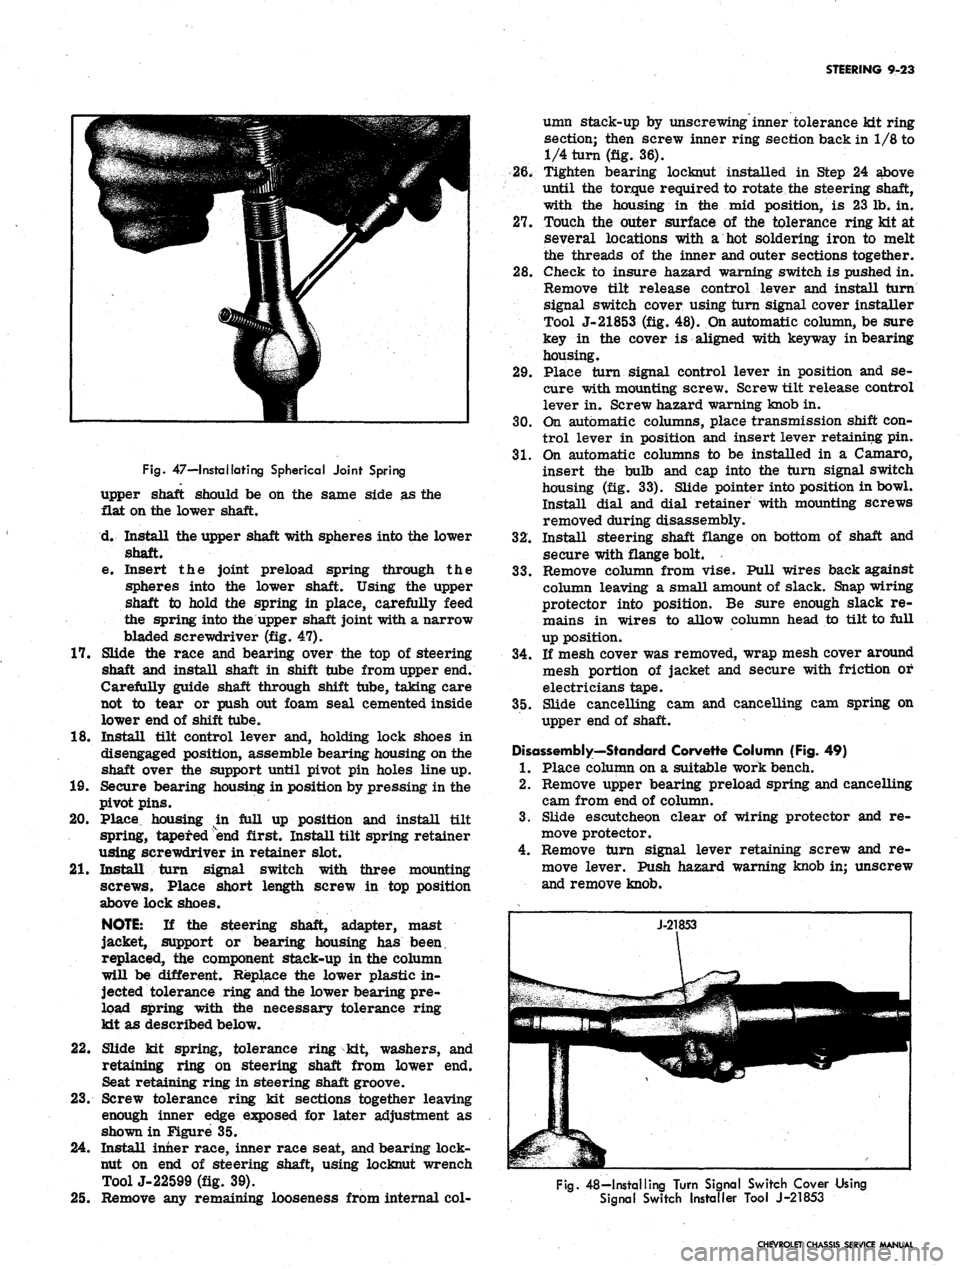 CHEVROLET CAMARO 1967 1.G Chassis Workshop Manual 
STEERING 9-23

Fig.
 47—I retaliating Spherical Joint Spring

upper shaft should be on the same side as the

flat on the lower shaft.

d. Install the upper shaft with spheres into the lower

shaft.